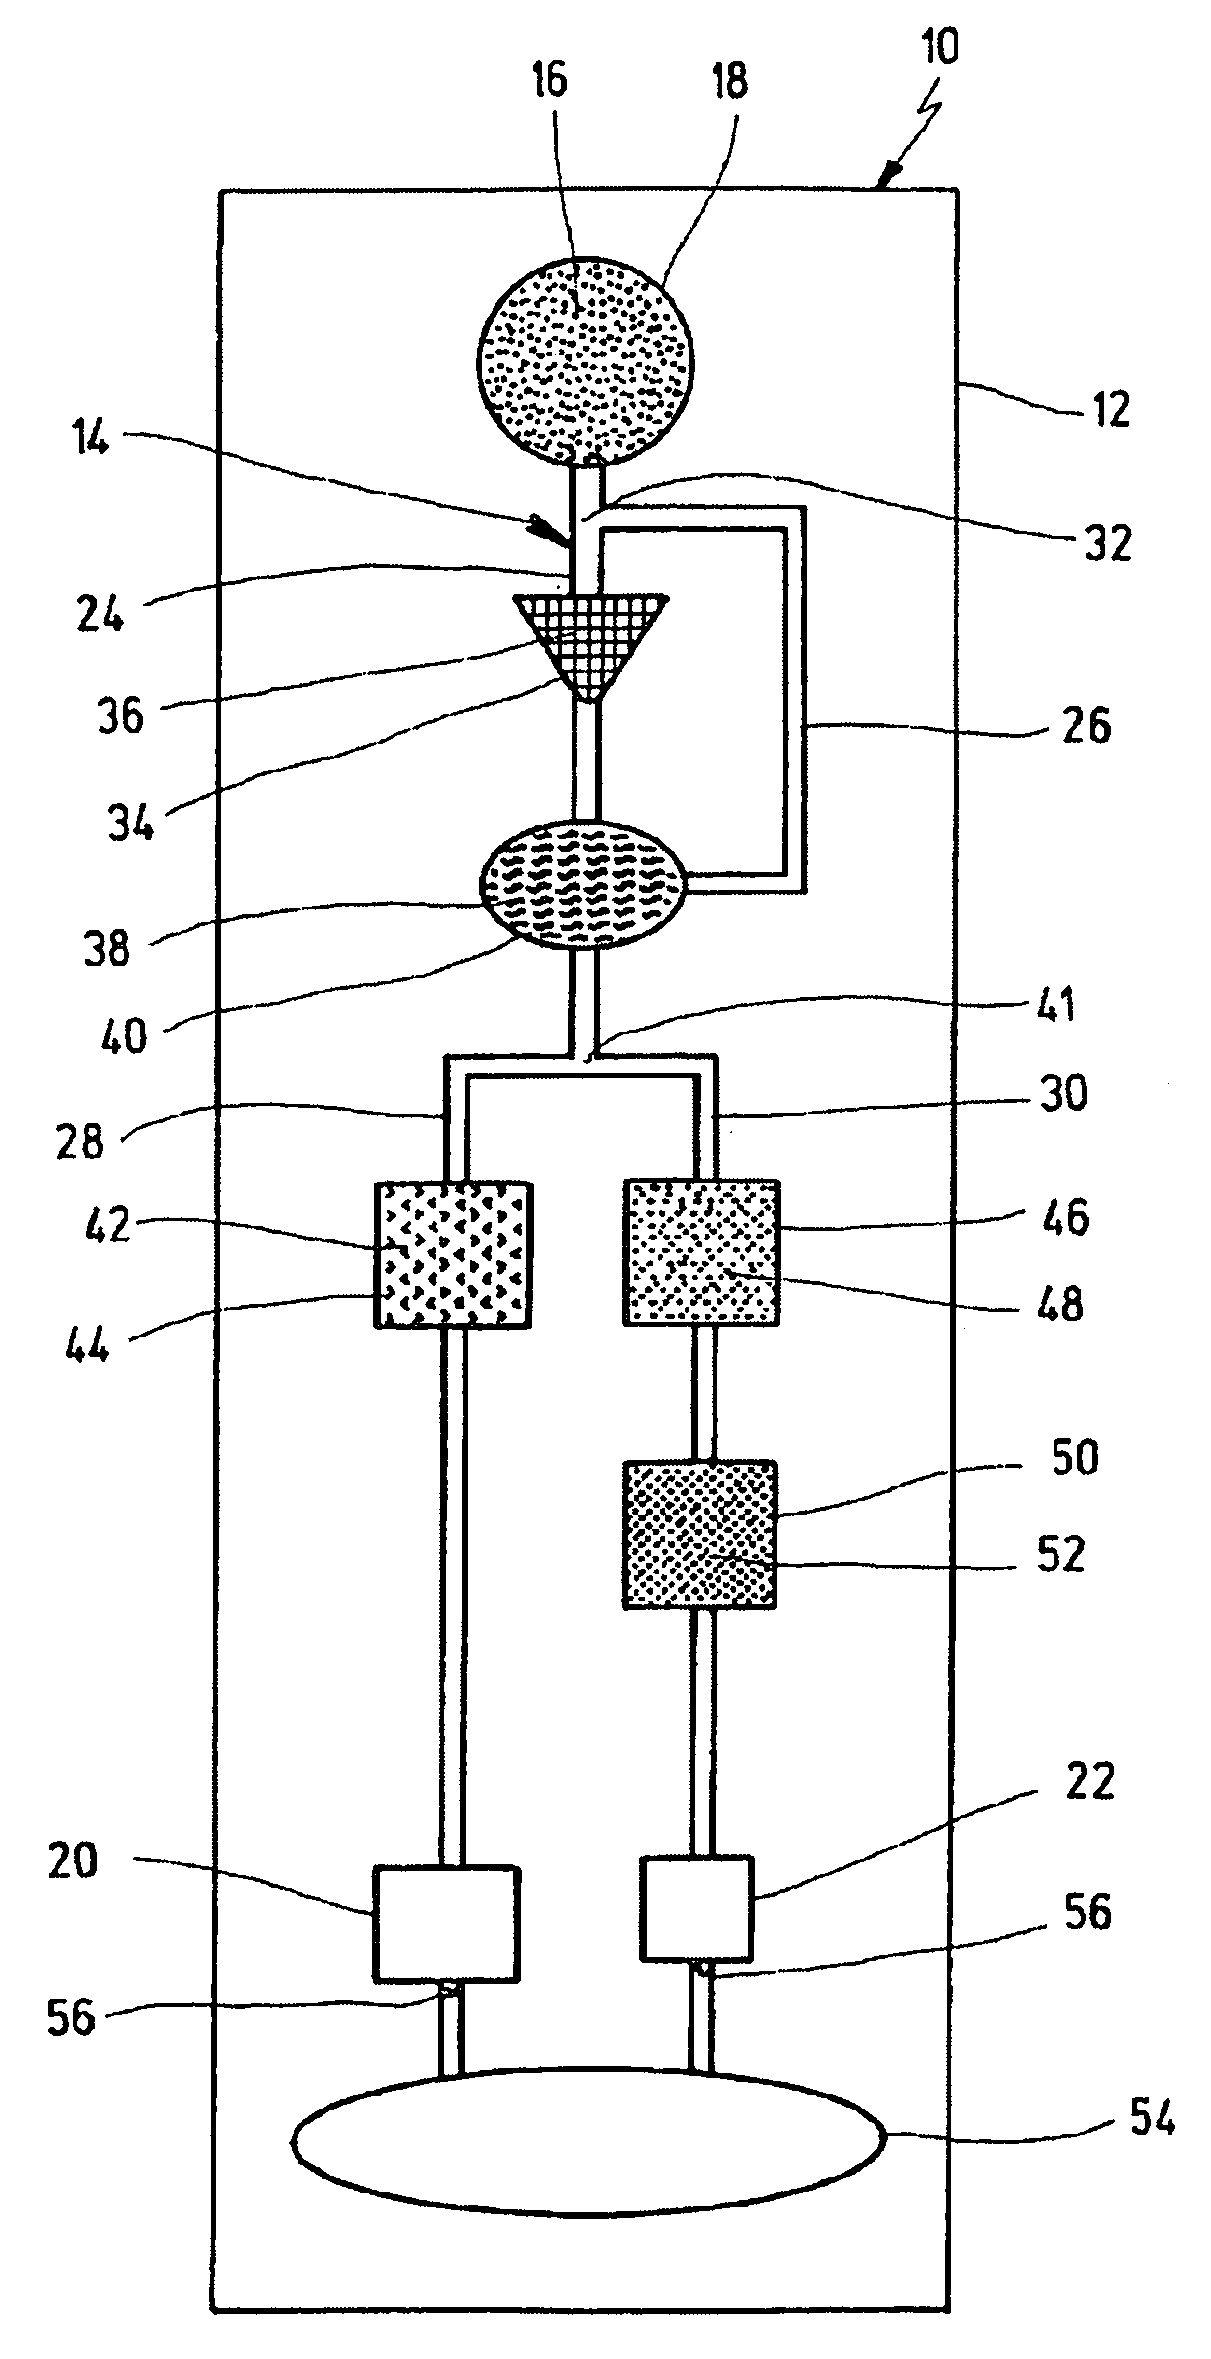 Analytical test element and method for blood analyses